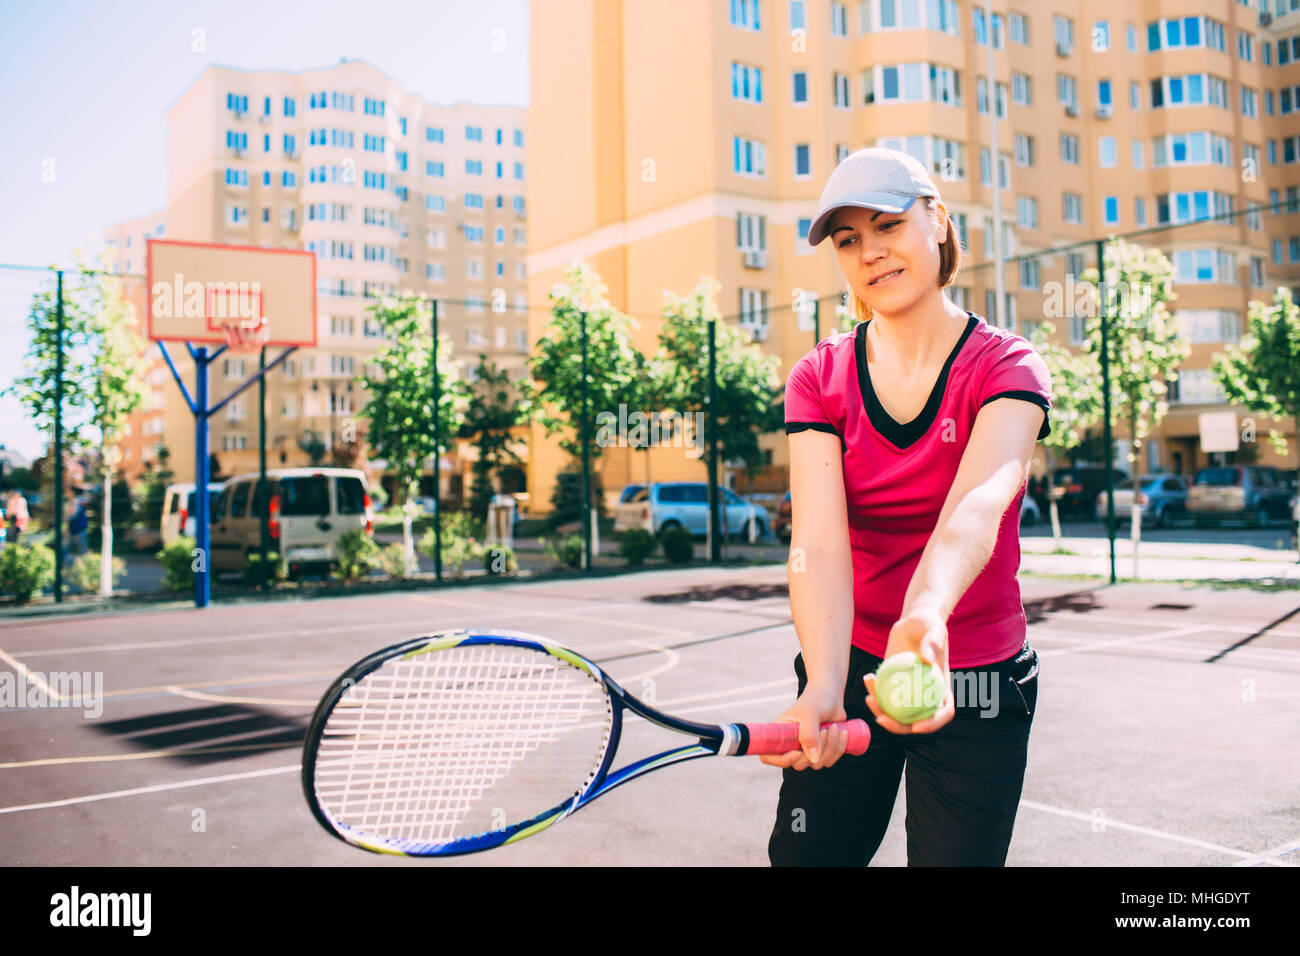 Pretty woman holding a tennis ball and racket with visor smiles on tennis tennis court on a sunny day Stock Photo